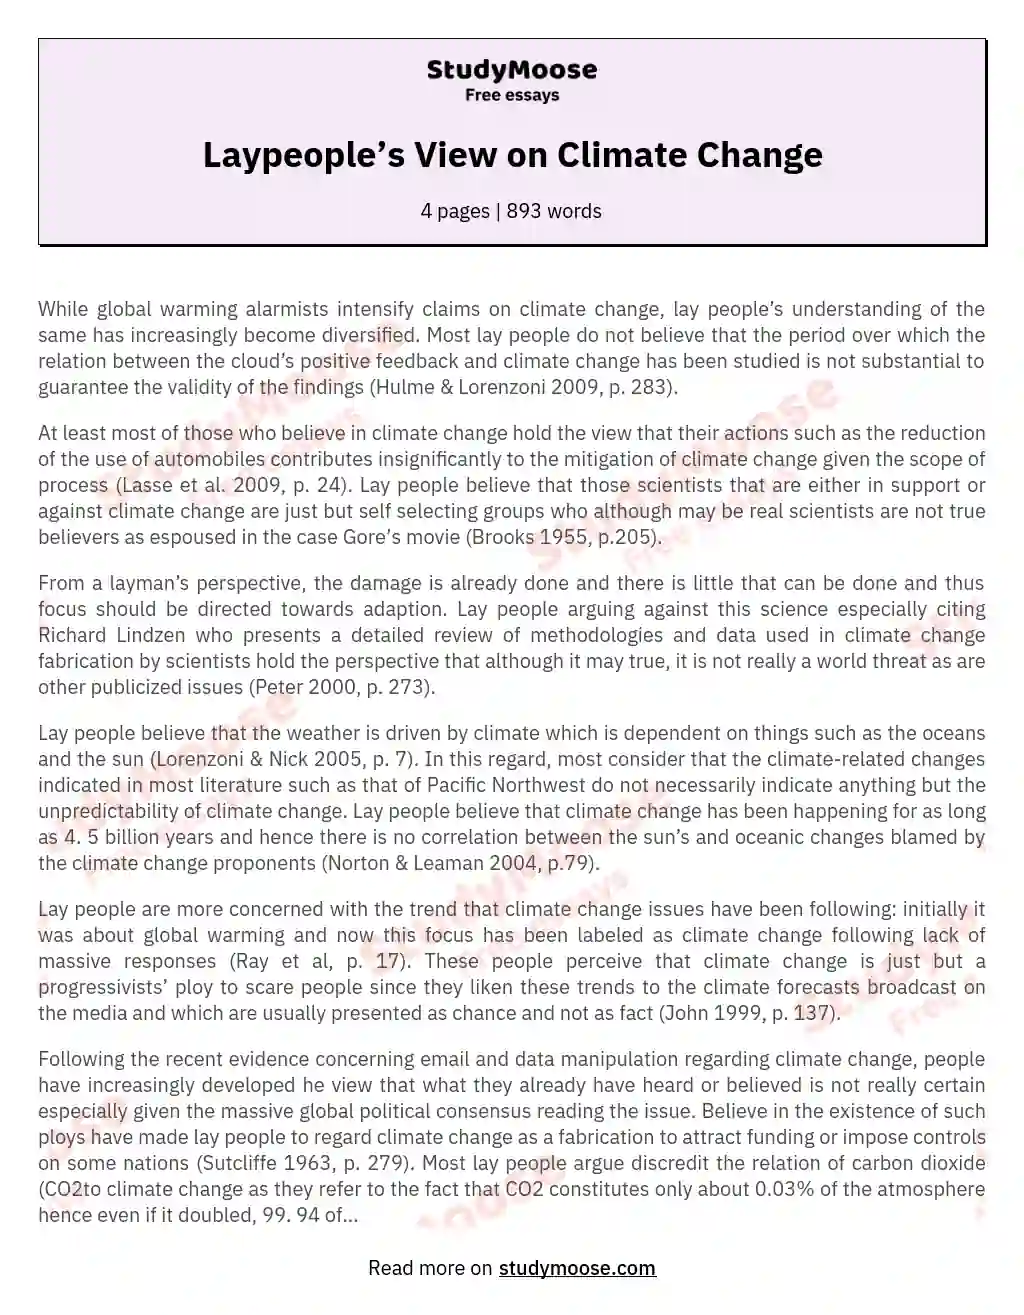 Laypeople’s View on Climate Change essay